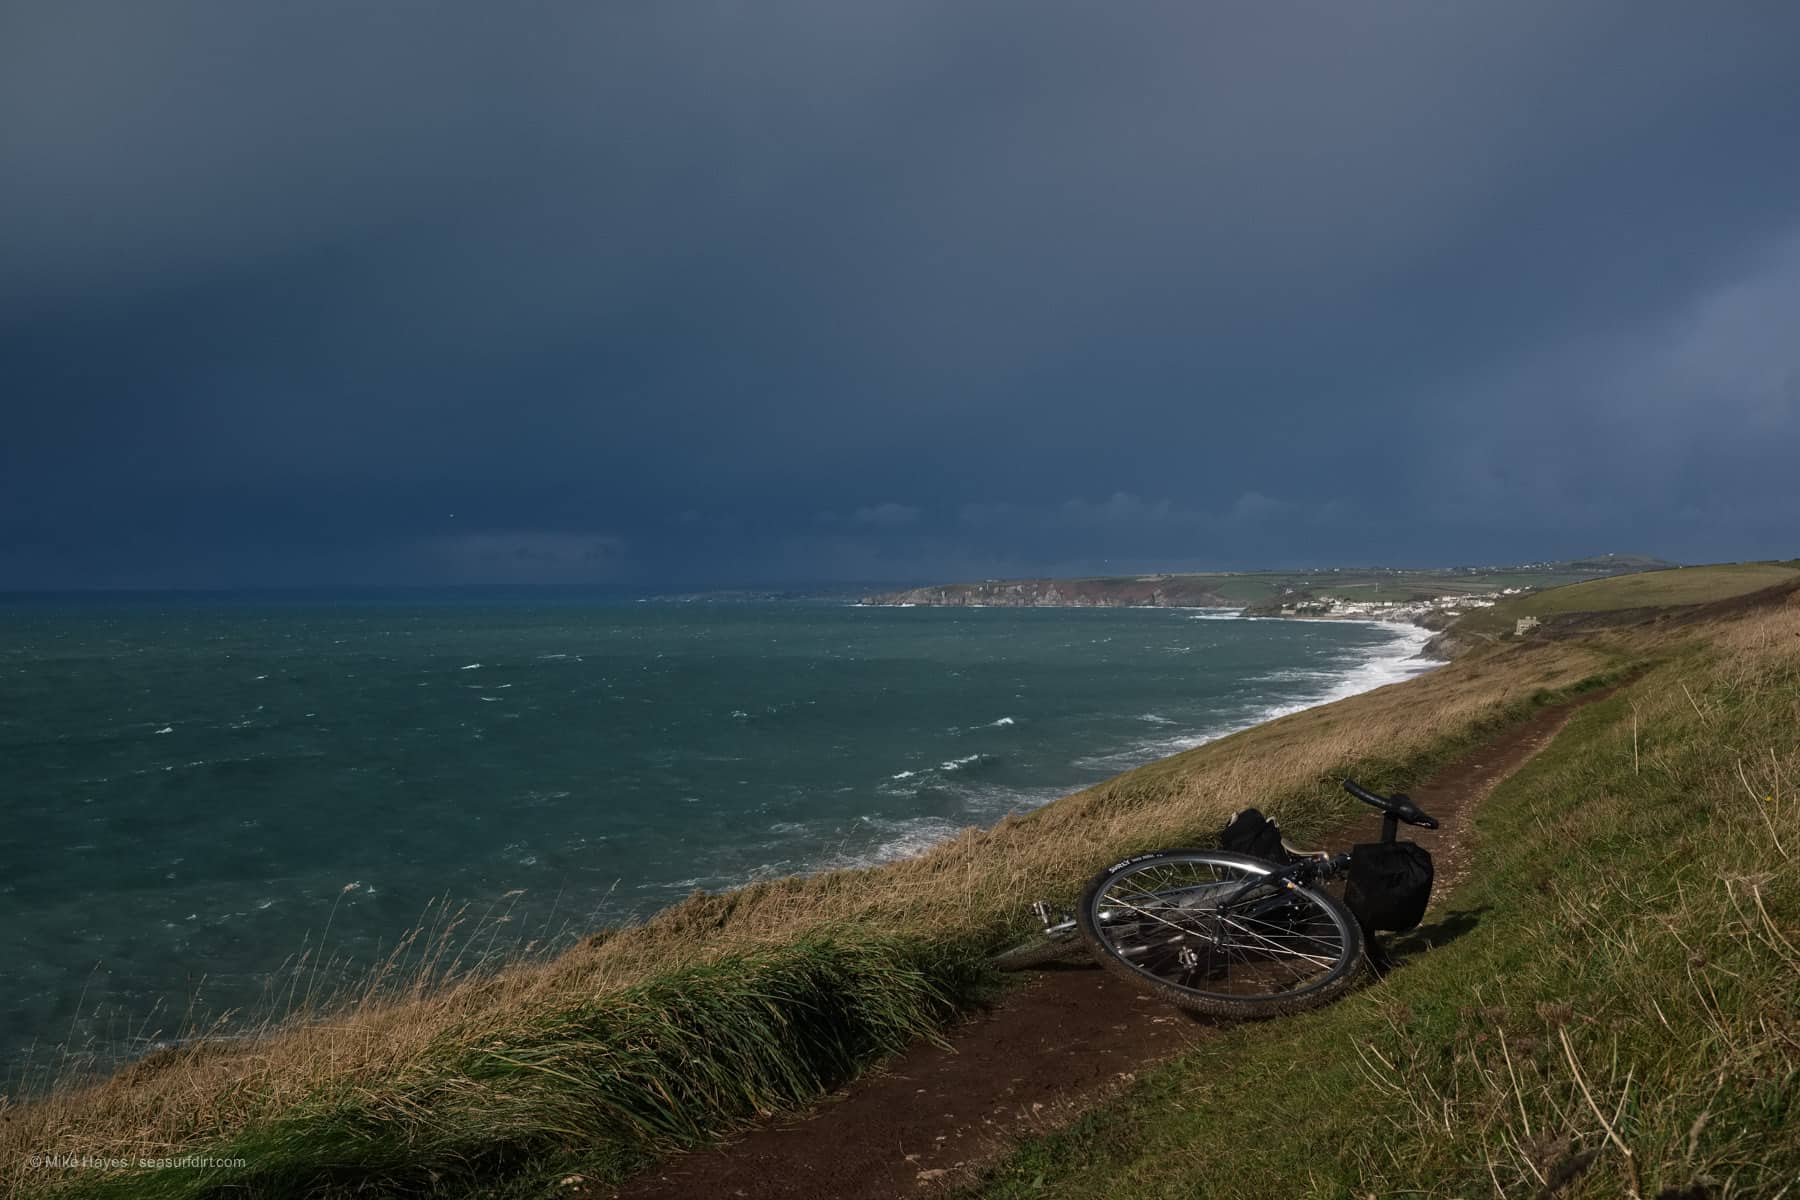 cycling the coast of Cornwall - stormy skies facing west